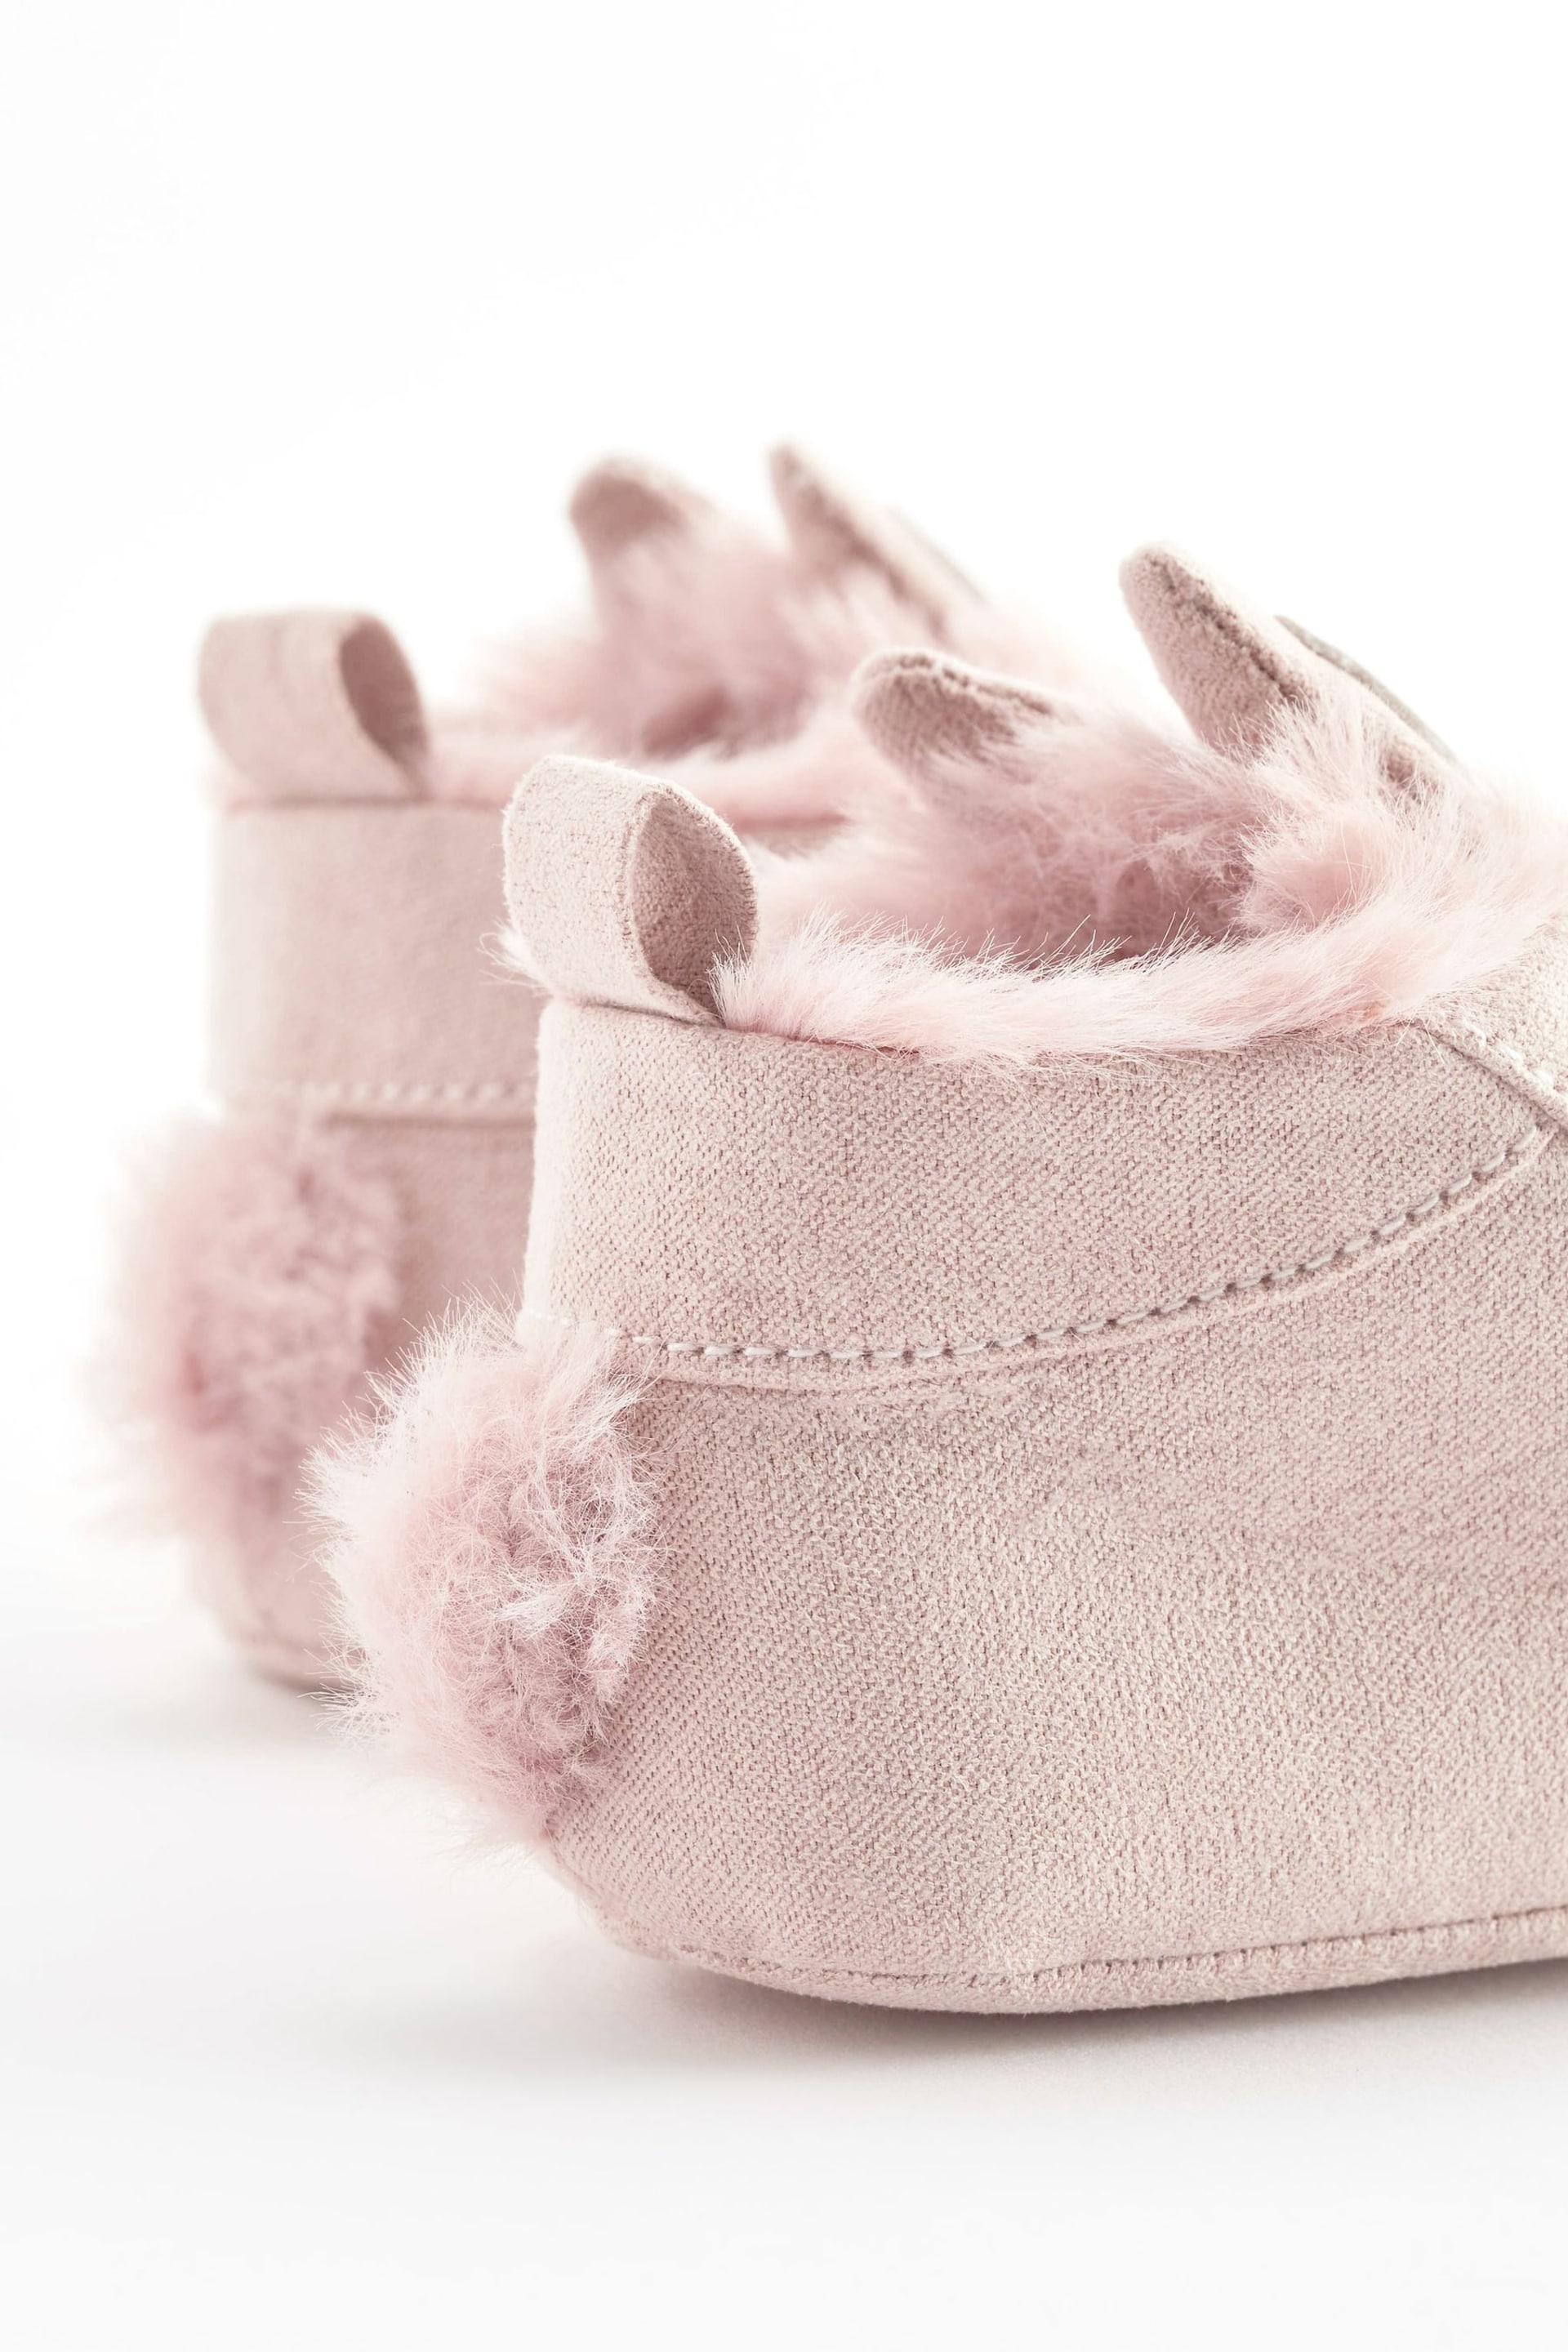 Pink Bunny High Top Baby Trainers (0-24mths) - Image 6 of 6